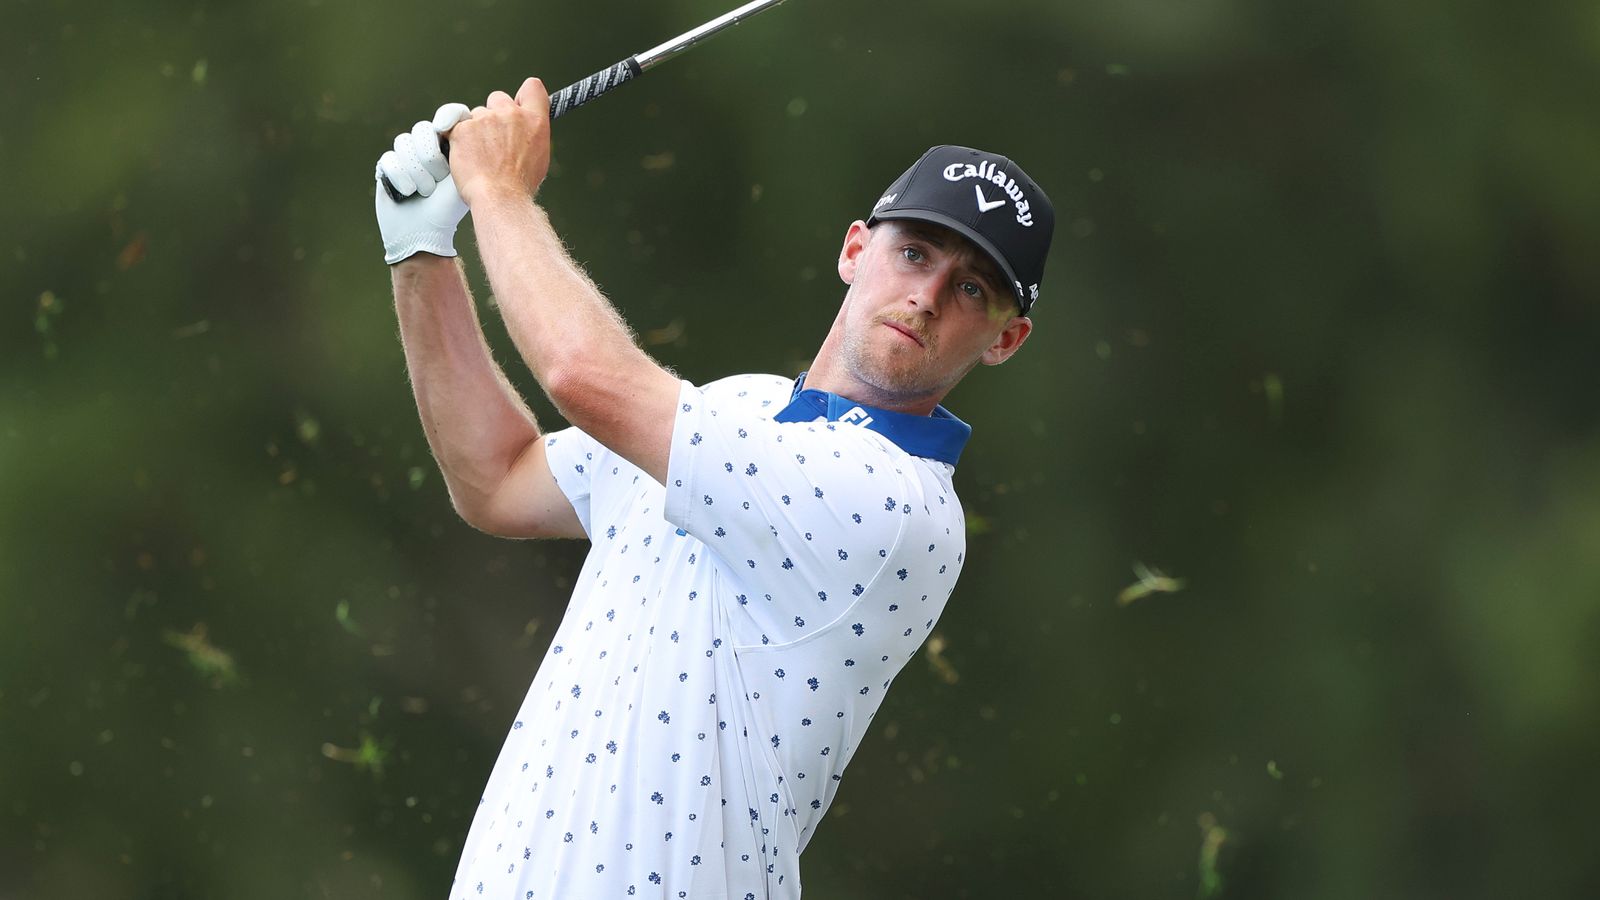 Sam Jones hits career-first albatross and takes two-shot lead at Soudal Open in DP World Tour